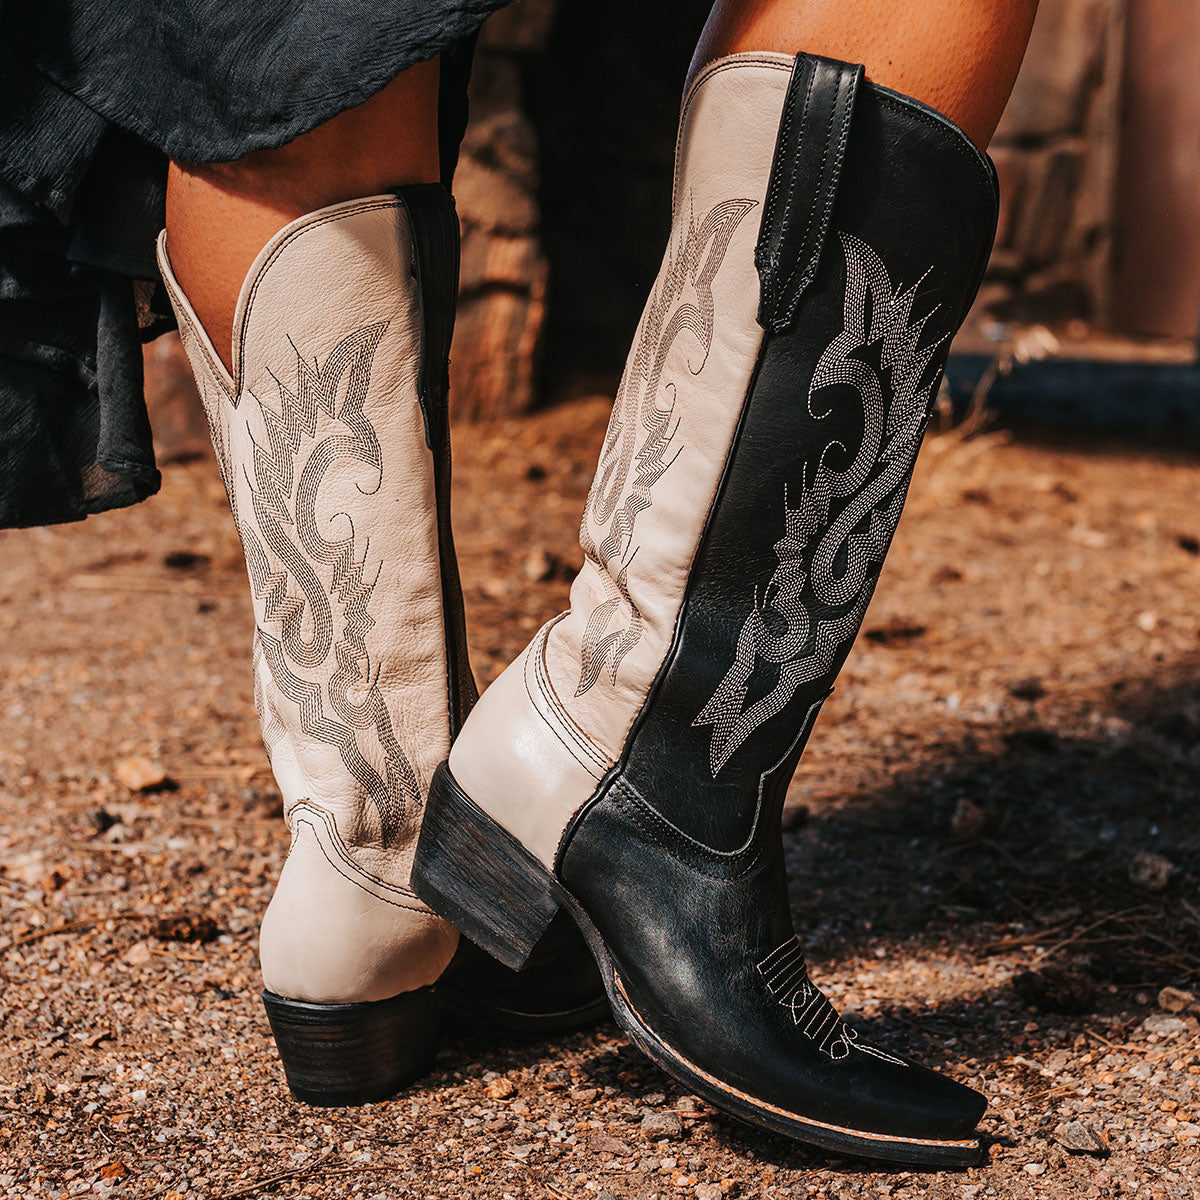 FREEBIRD women's Woodland black white multi cowboy boot with stitch detailing and snip toe construction lifestyle